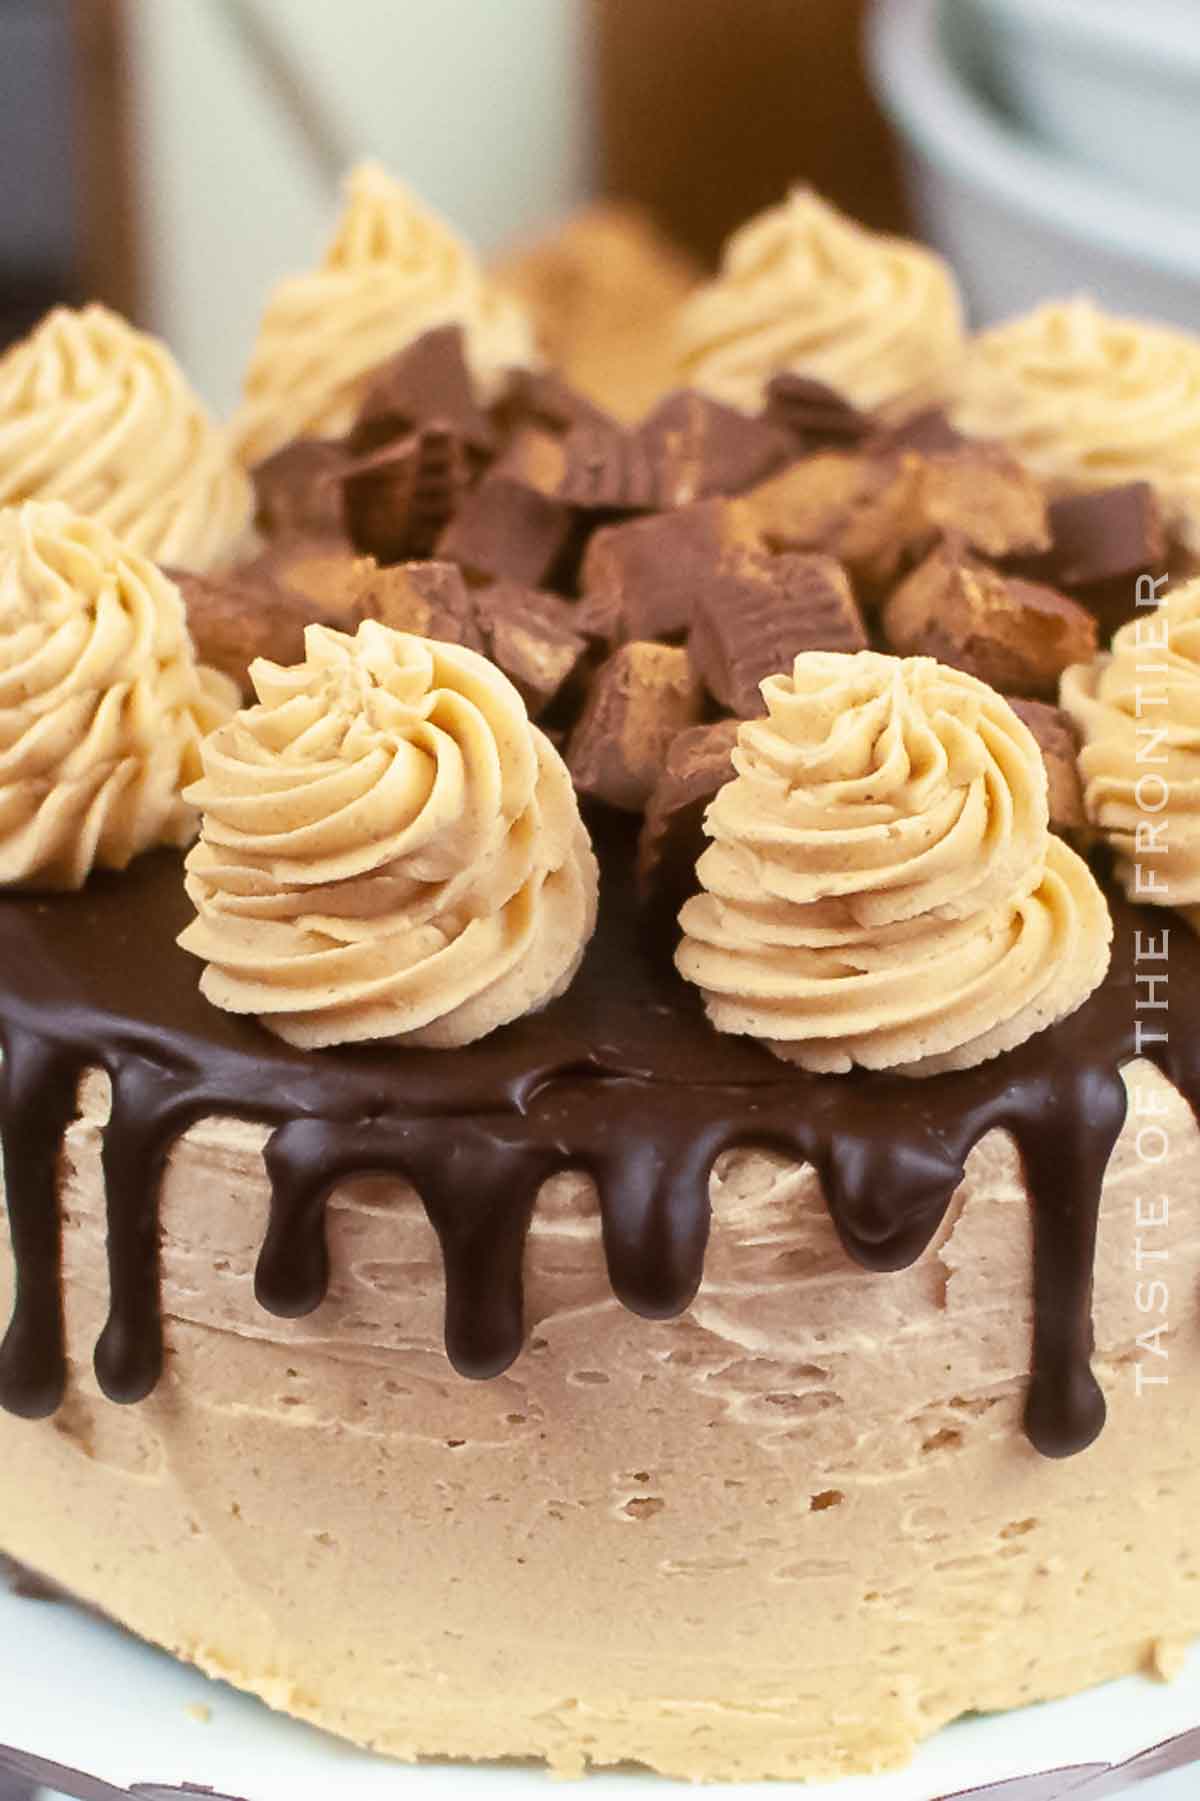 Chocolate Cake with Peanut Butter Frosting